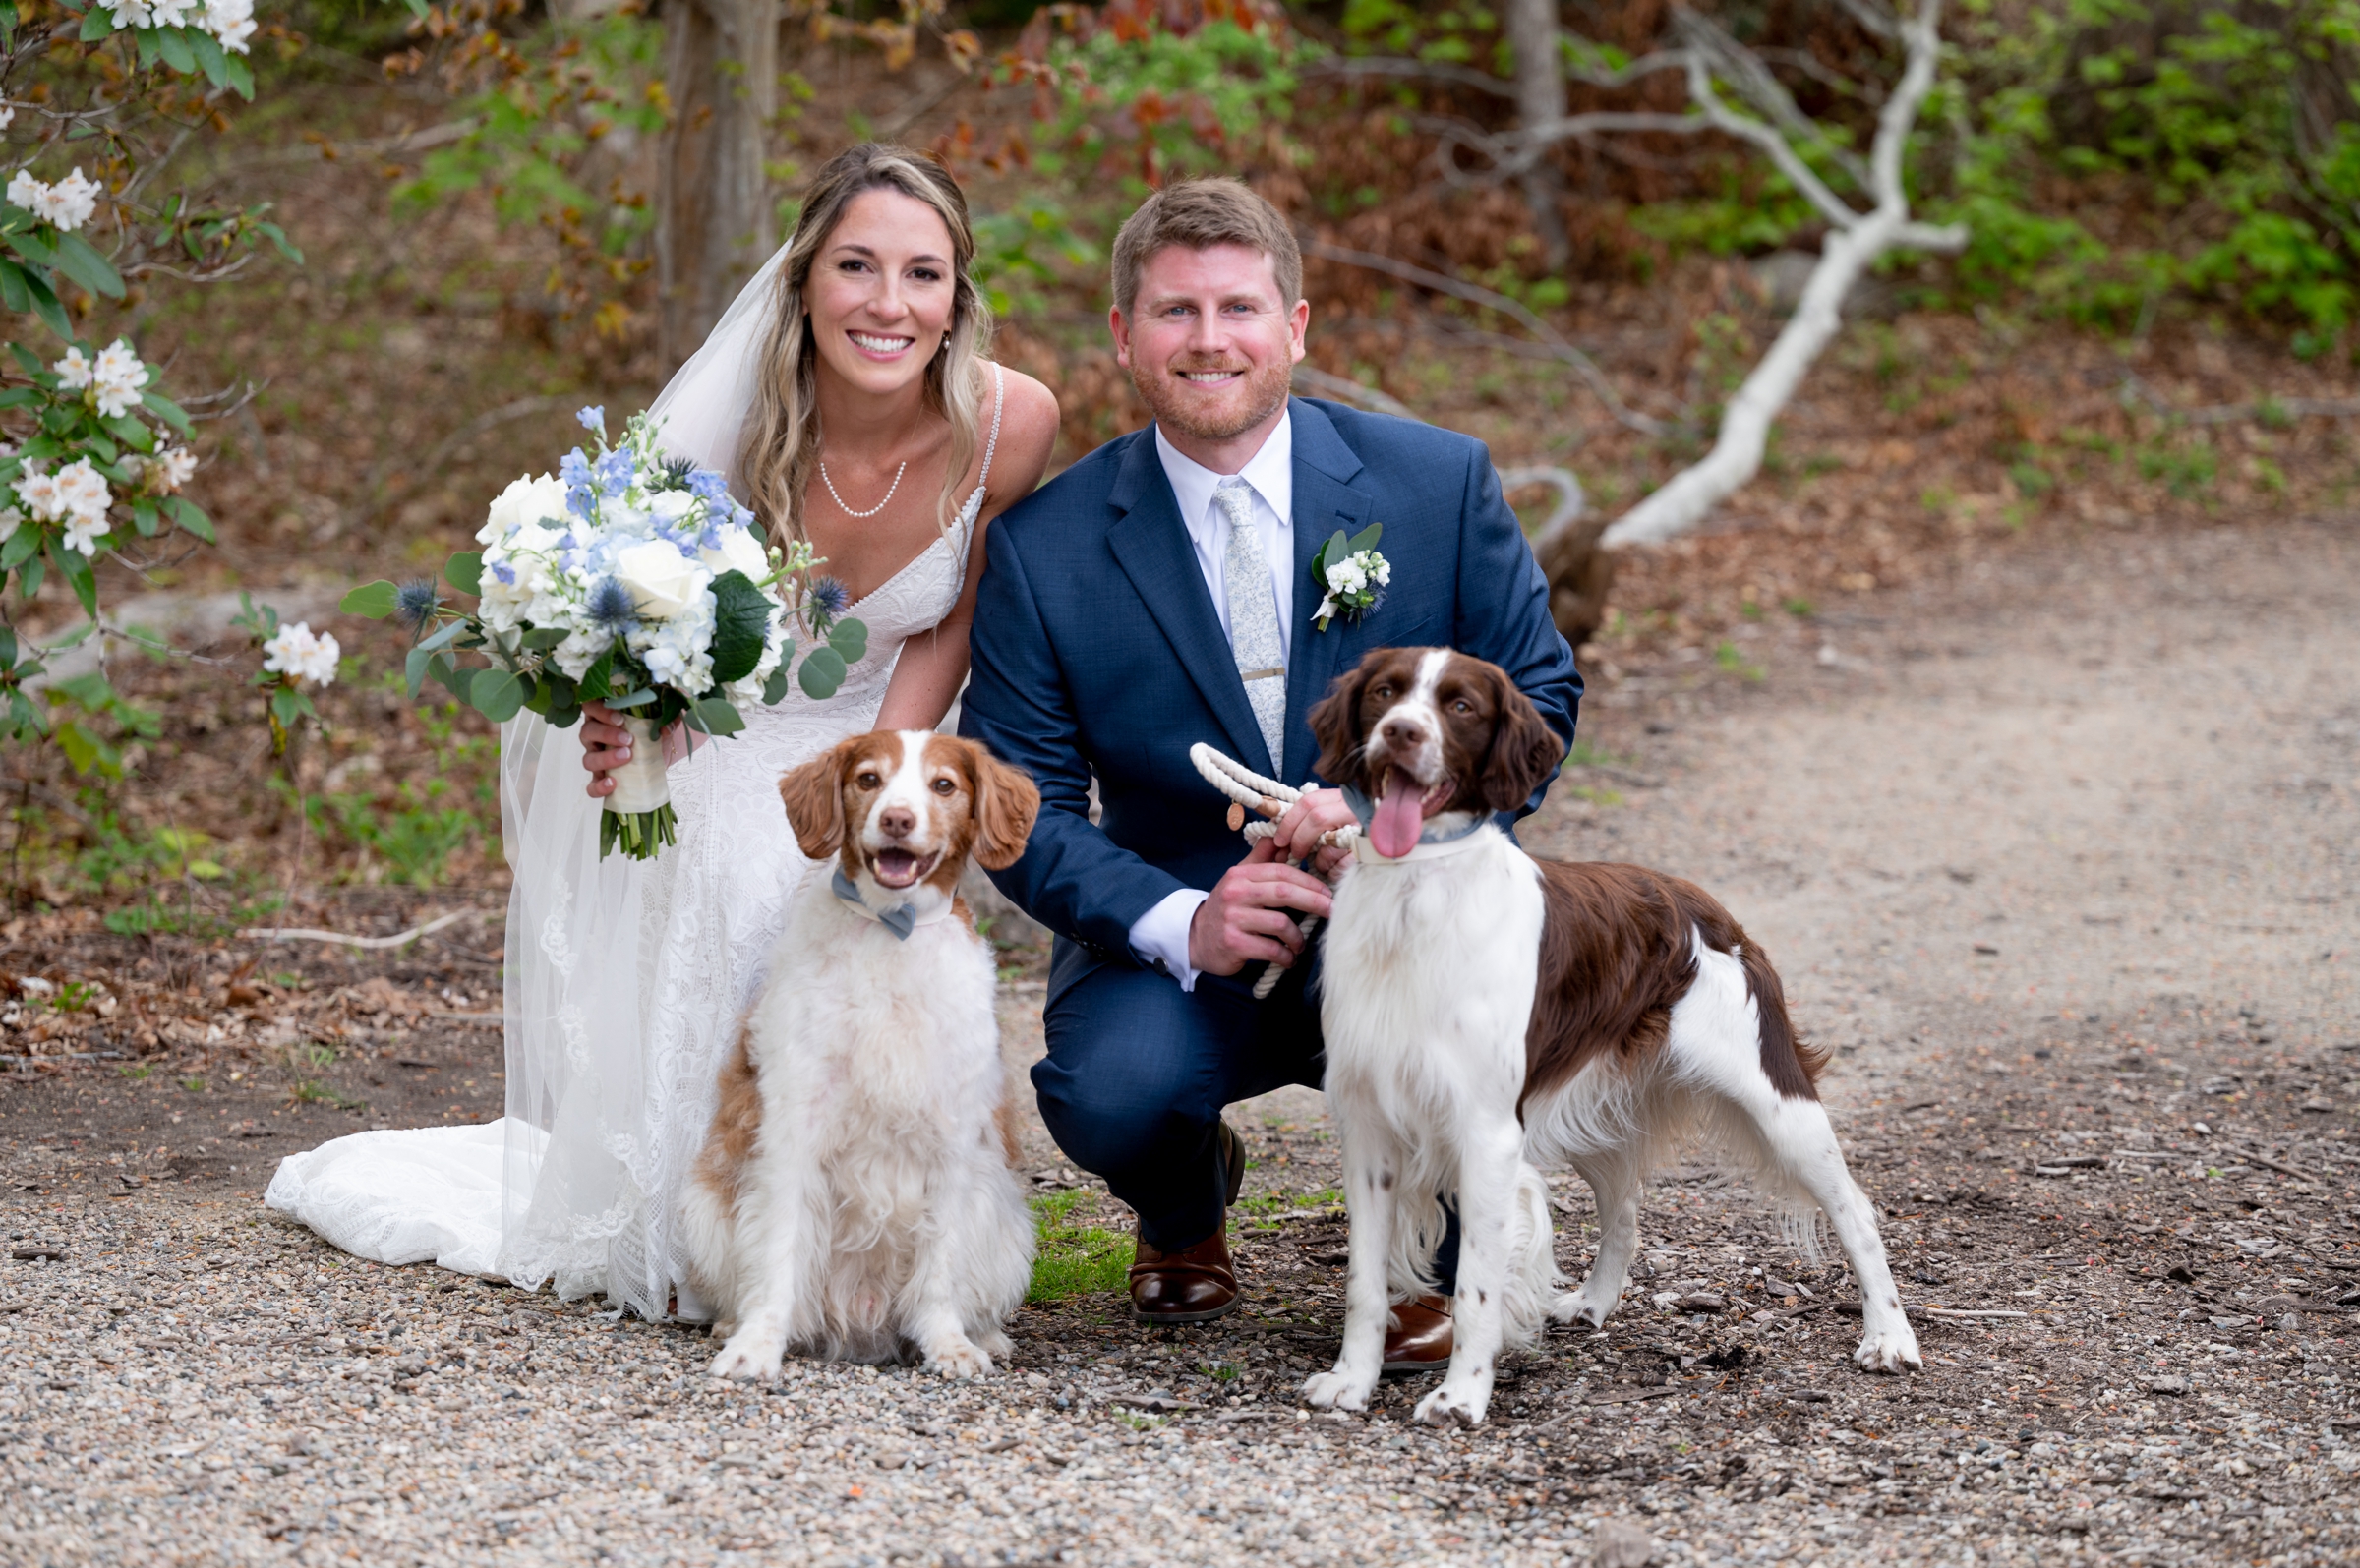 Bride and Groom with their dogs at wedding